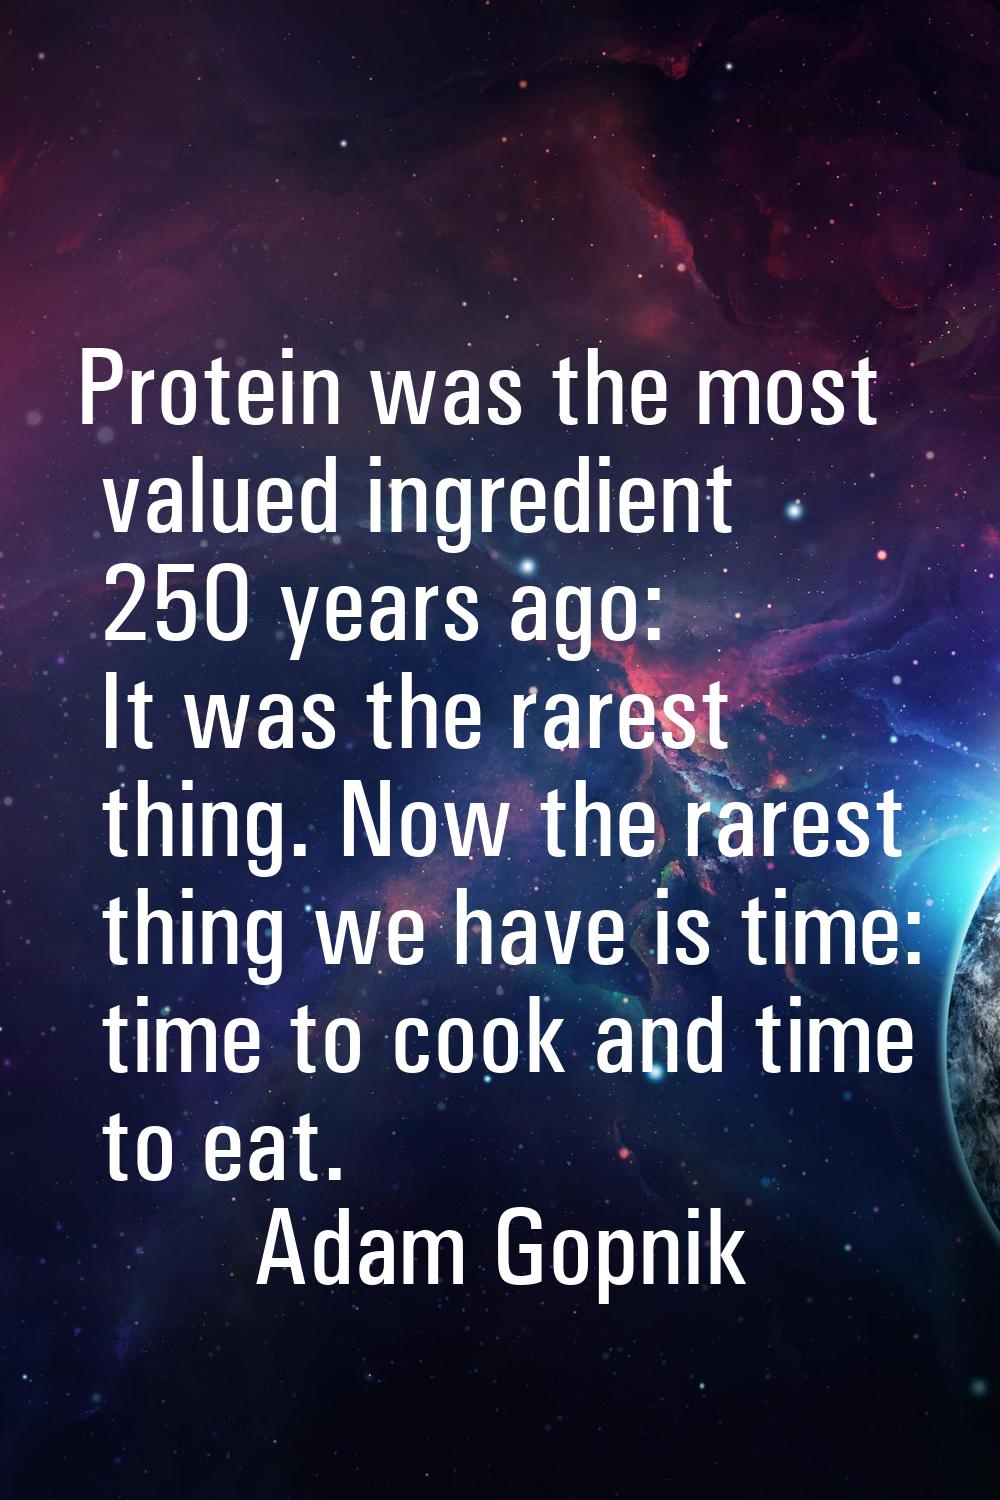 Protein was the most valued ingredient 250 years ago: It was the rarest thing. Now the rarest thing